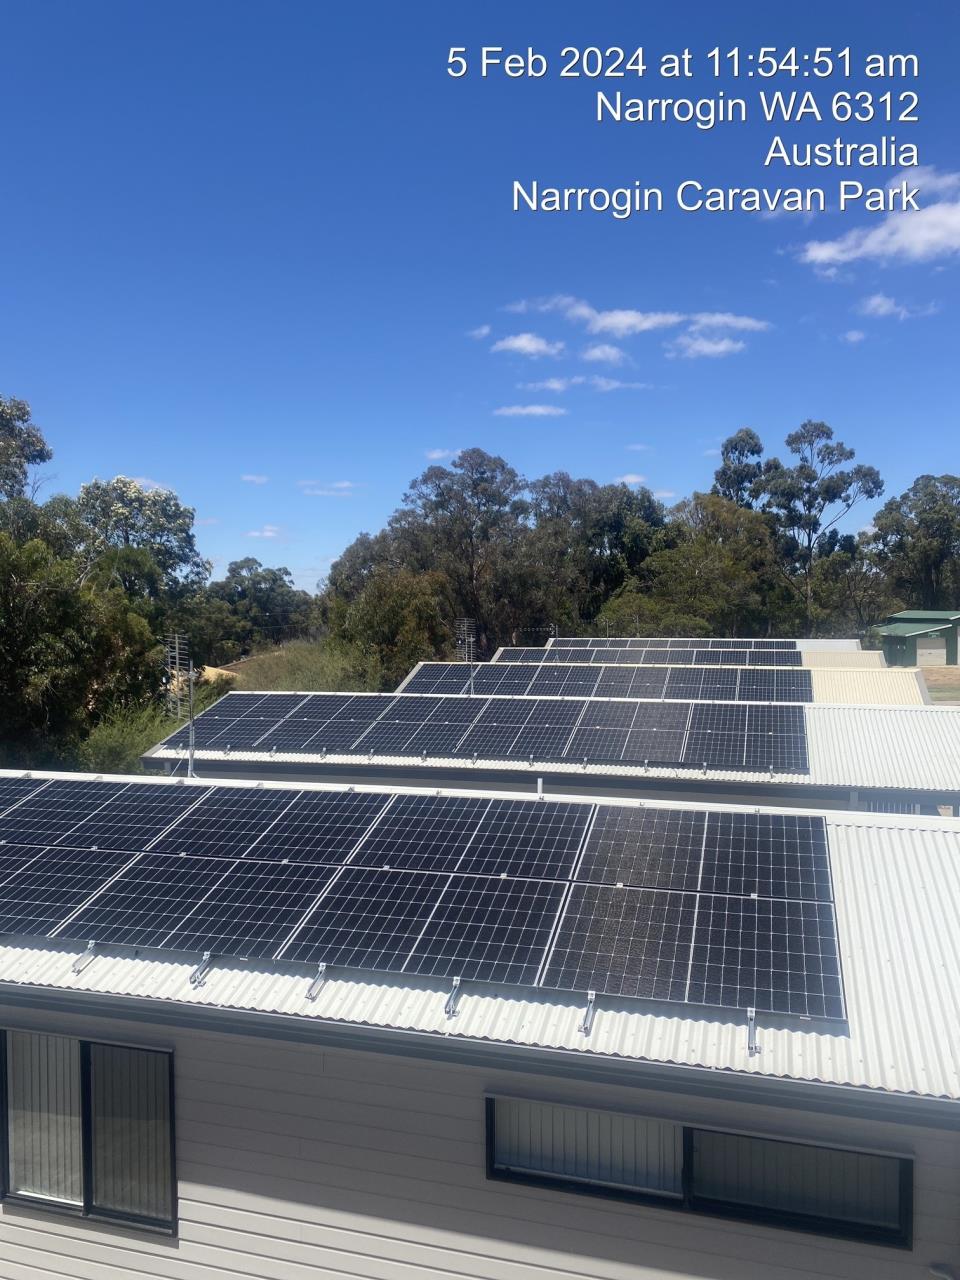 Media Release - Exciting Solar News from the Shire of Narrogin